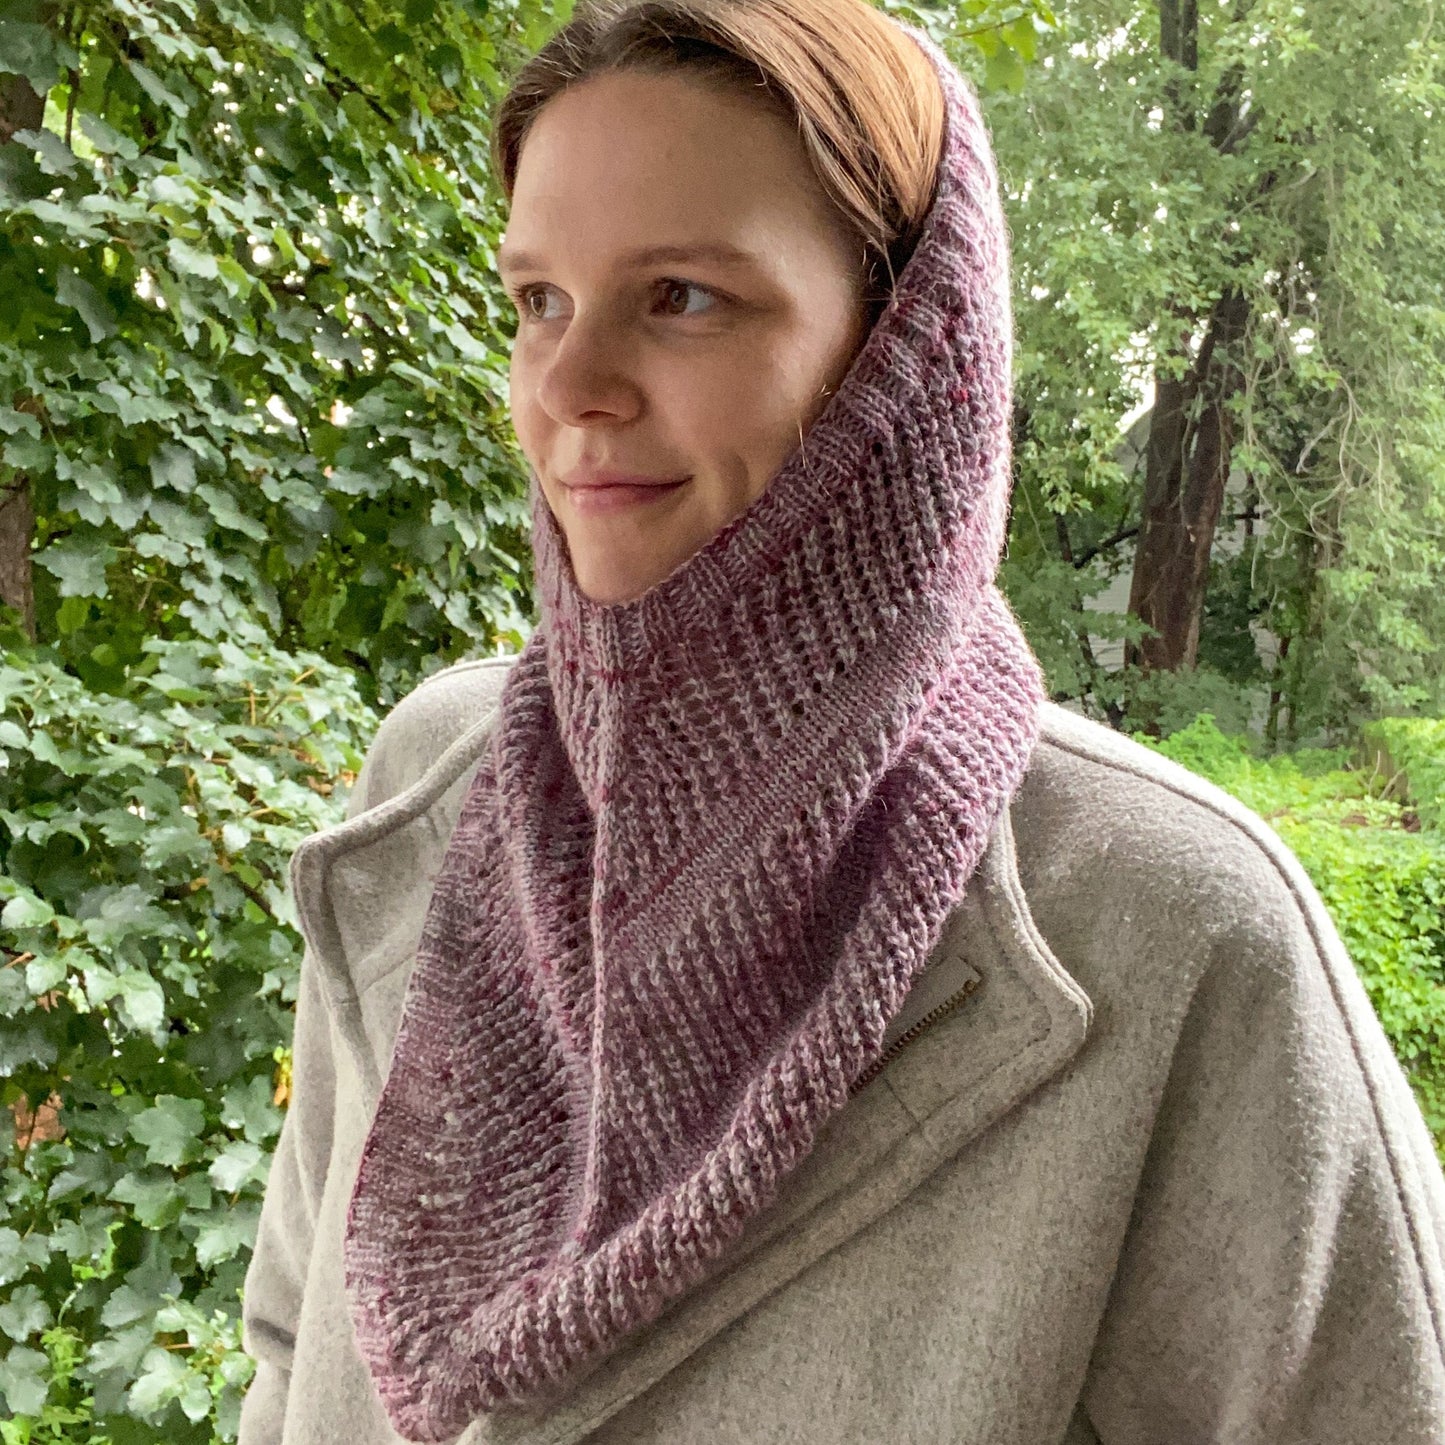 jules, the designer, wearing a lace striped cowl with ribbing in a purple/pink yarn